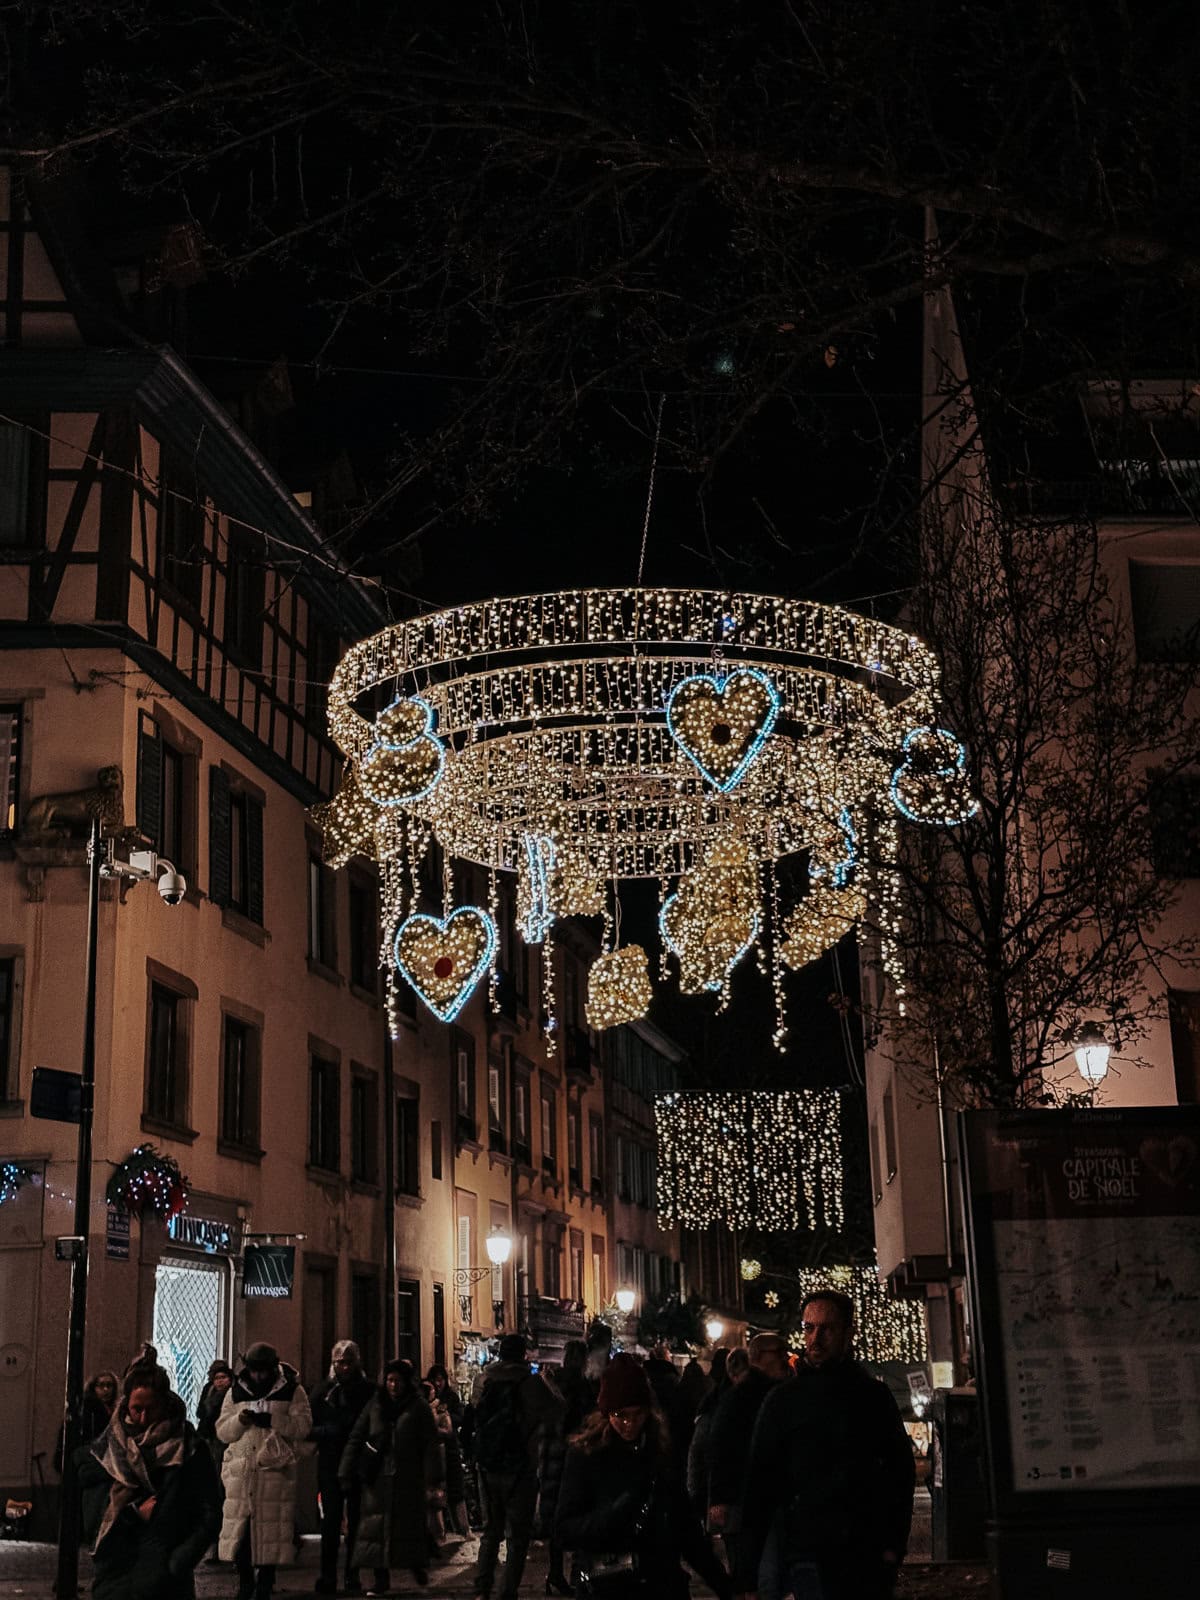 A festive street decoration featuring a large chandelier-like structure with glowing hearts and stars, set against a backdrop of traditional European buildings at night